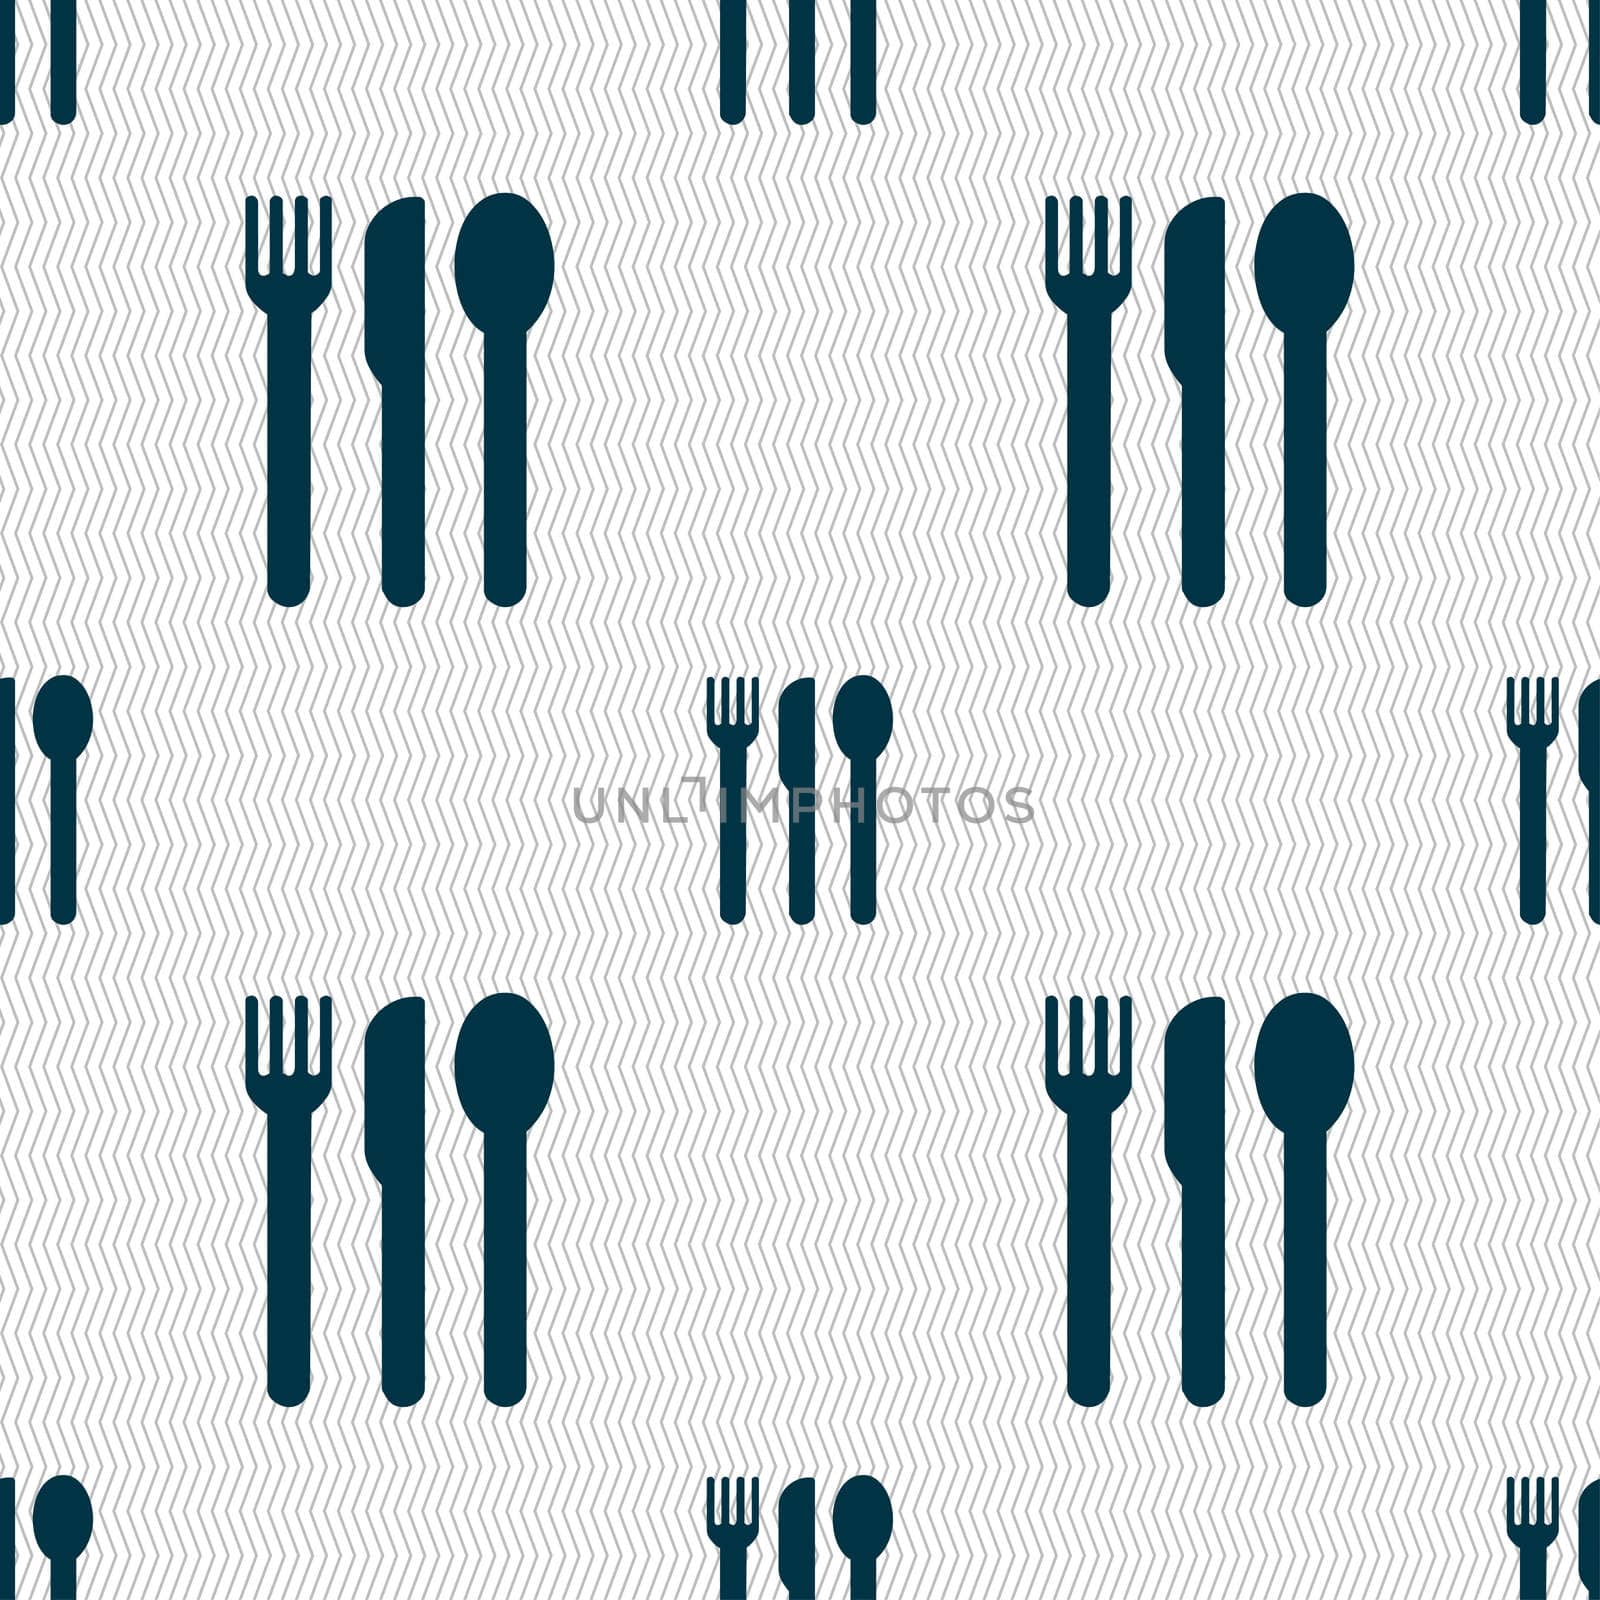 fork, knife, spoon icon sign. Seamless pattern with geometric texture. illustration